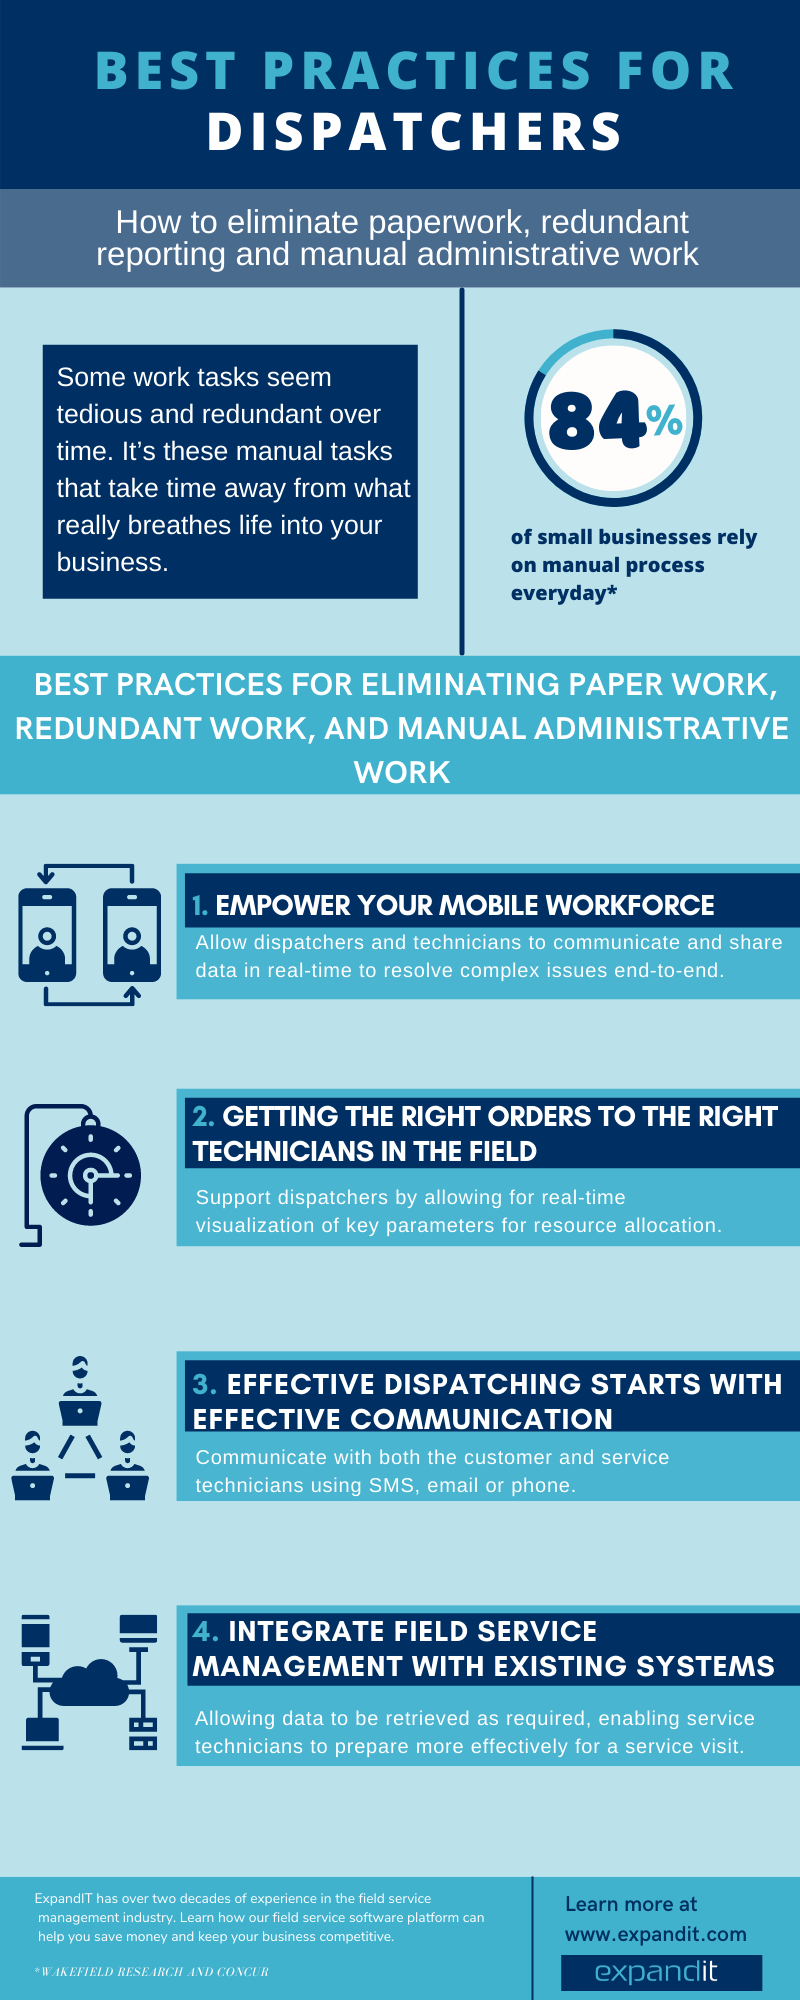 Best Practices for Dispatchers infographic